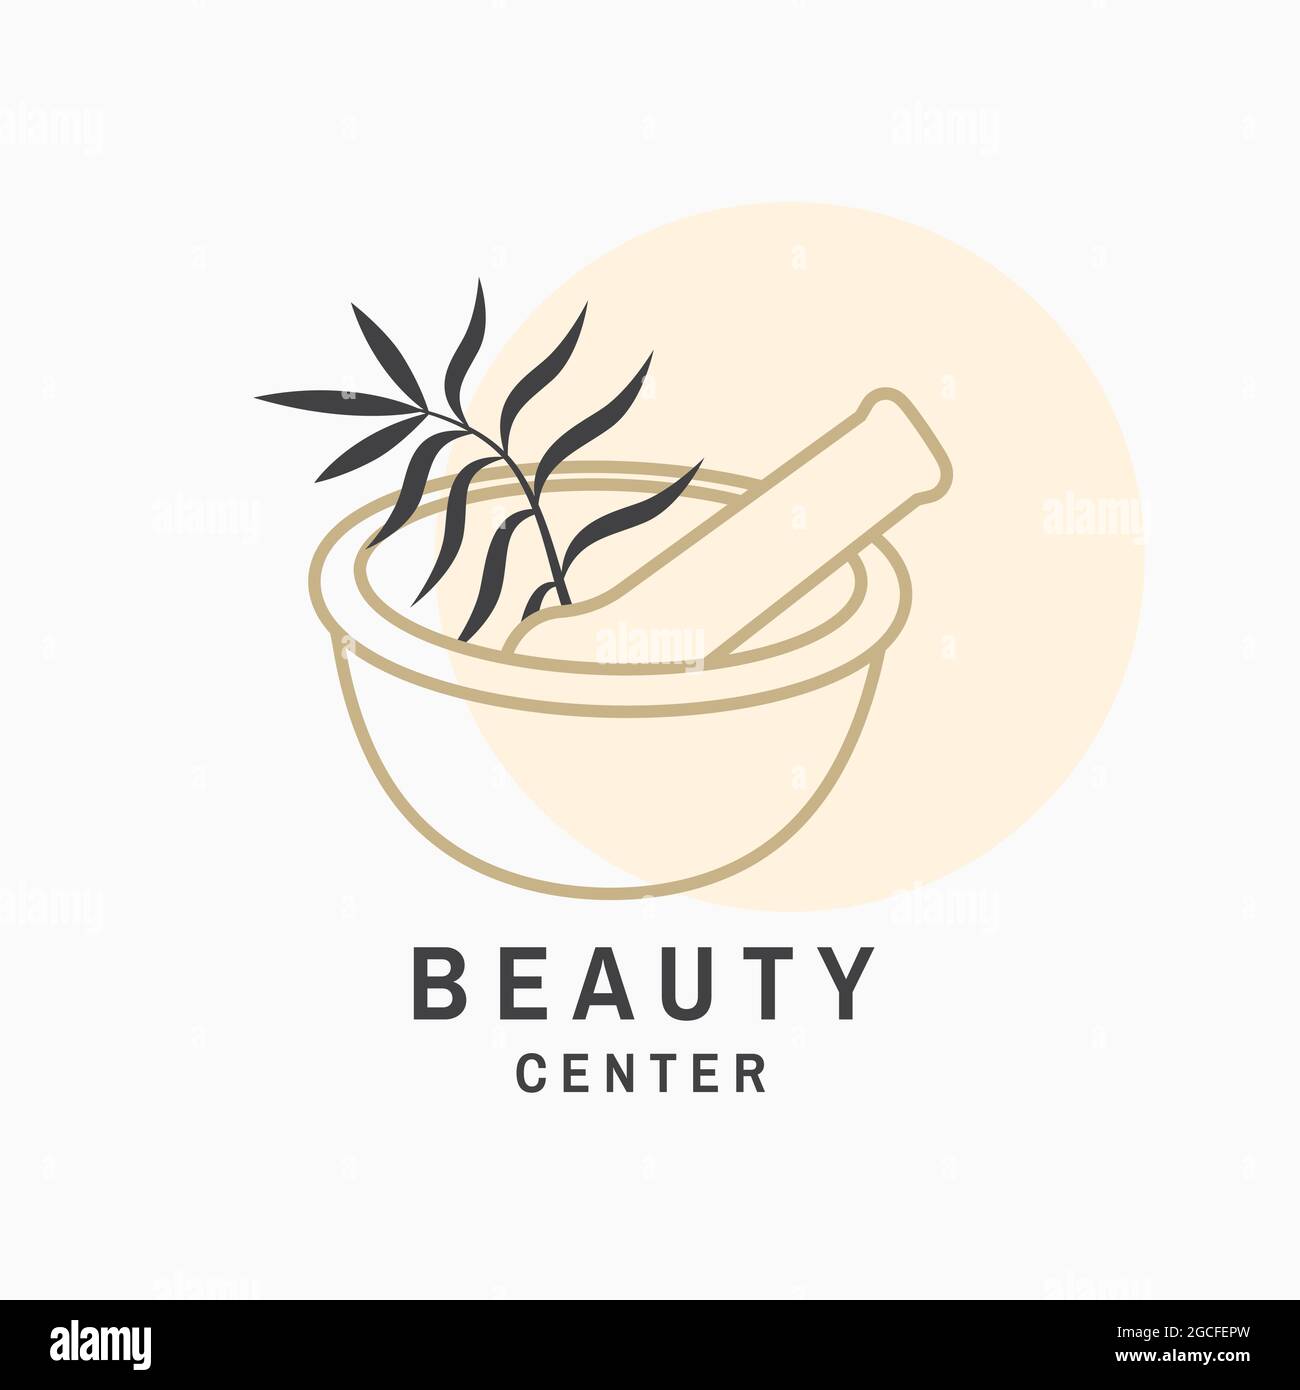 https://c8.alamy.com/comp/2GCFEPW/beauty-center-with-flowers-mortar-and-pestle-for-logo-label-badge-sign-emblem-for-cosmetics-jewellery-beauty-and-handmade-products-tattoo-2GCFEPW.jpg